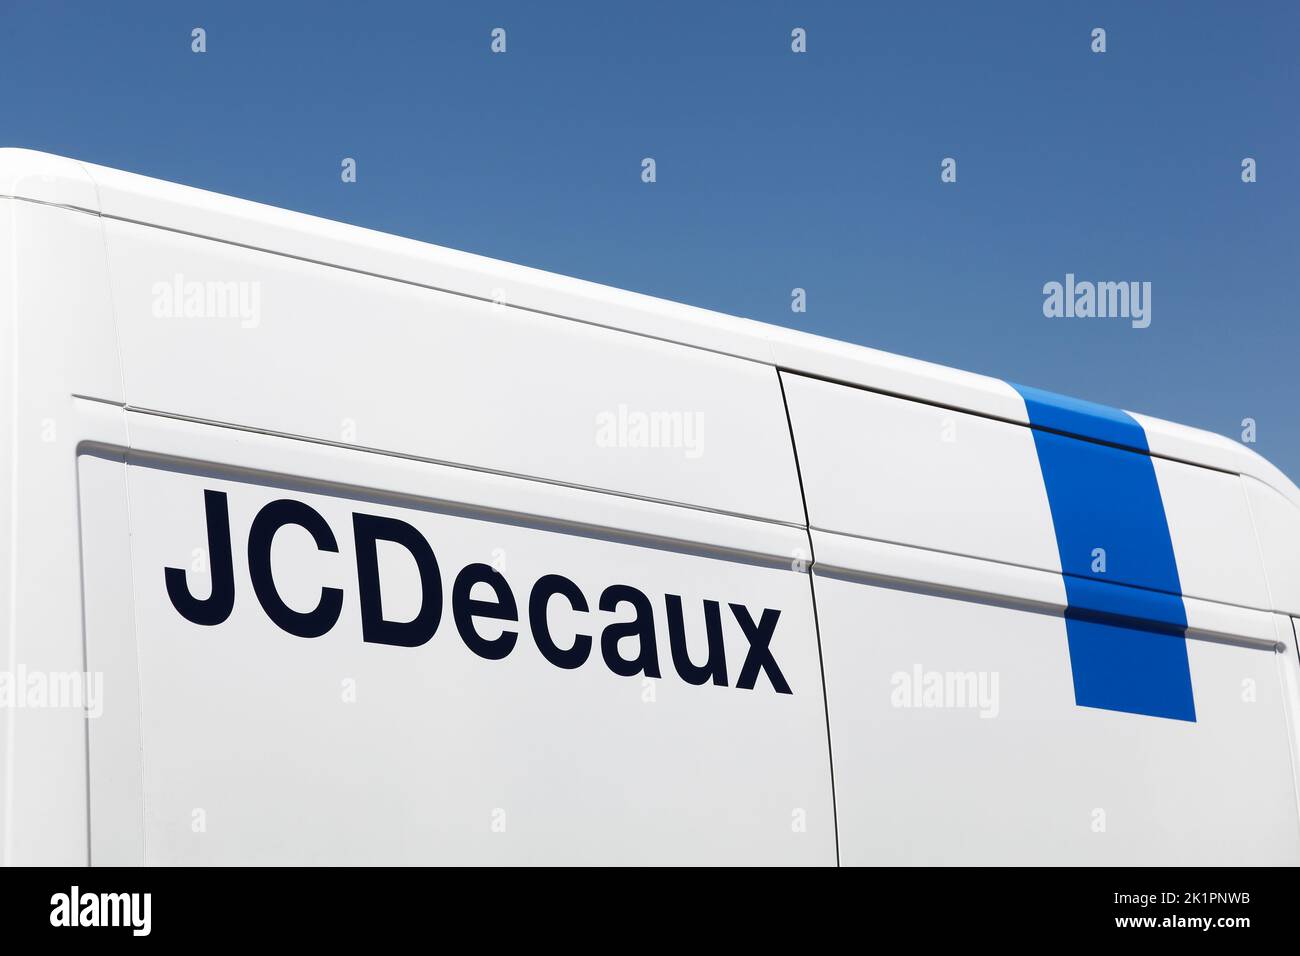 Decines, France - June 13, 2019: JCDecaux is a multinational corporation based in France, known for its bus-stop advertising systems and billboards Stock Photo